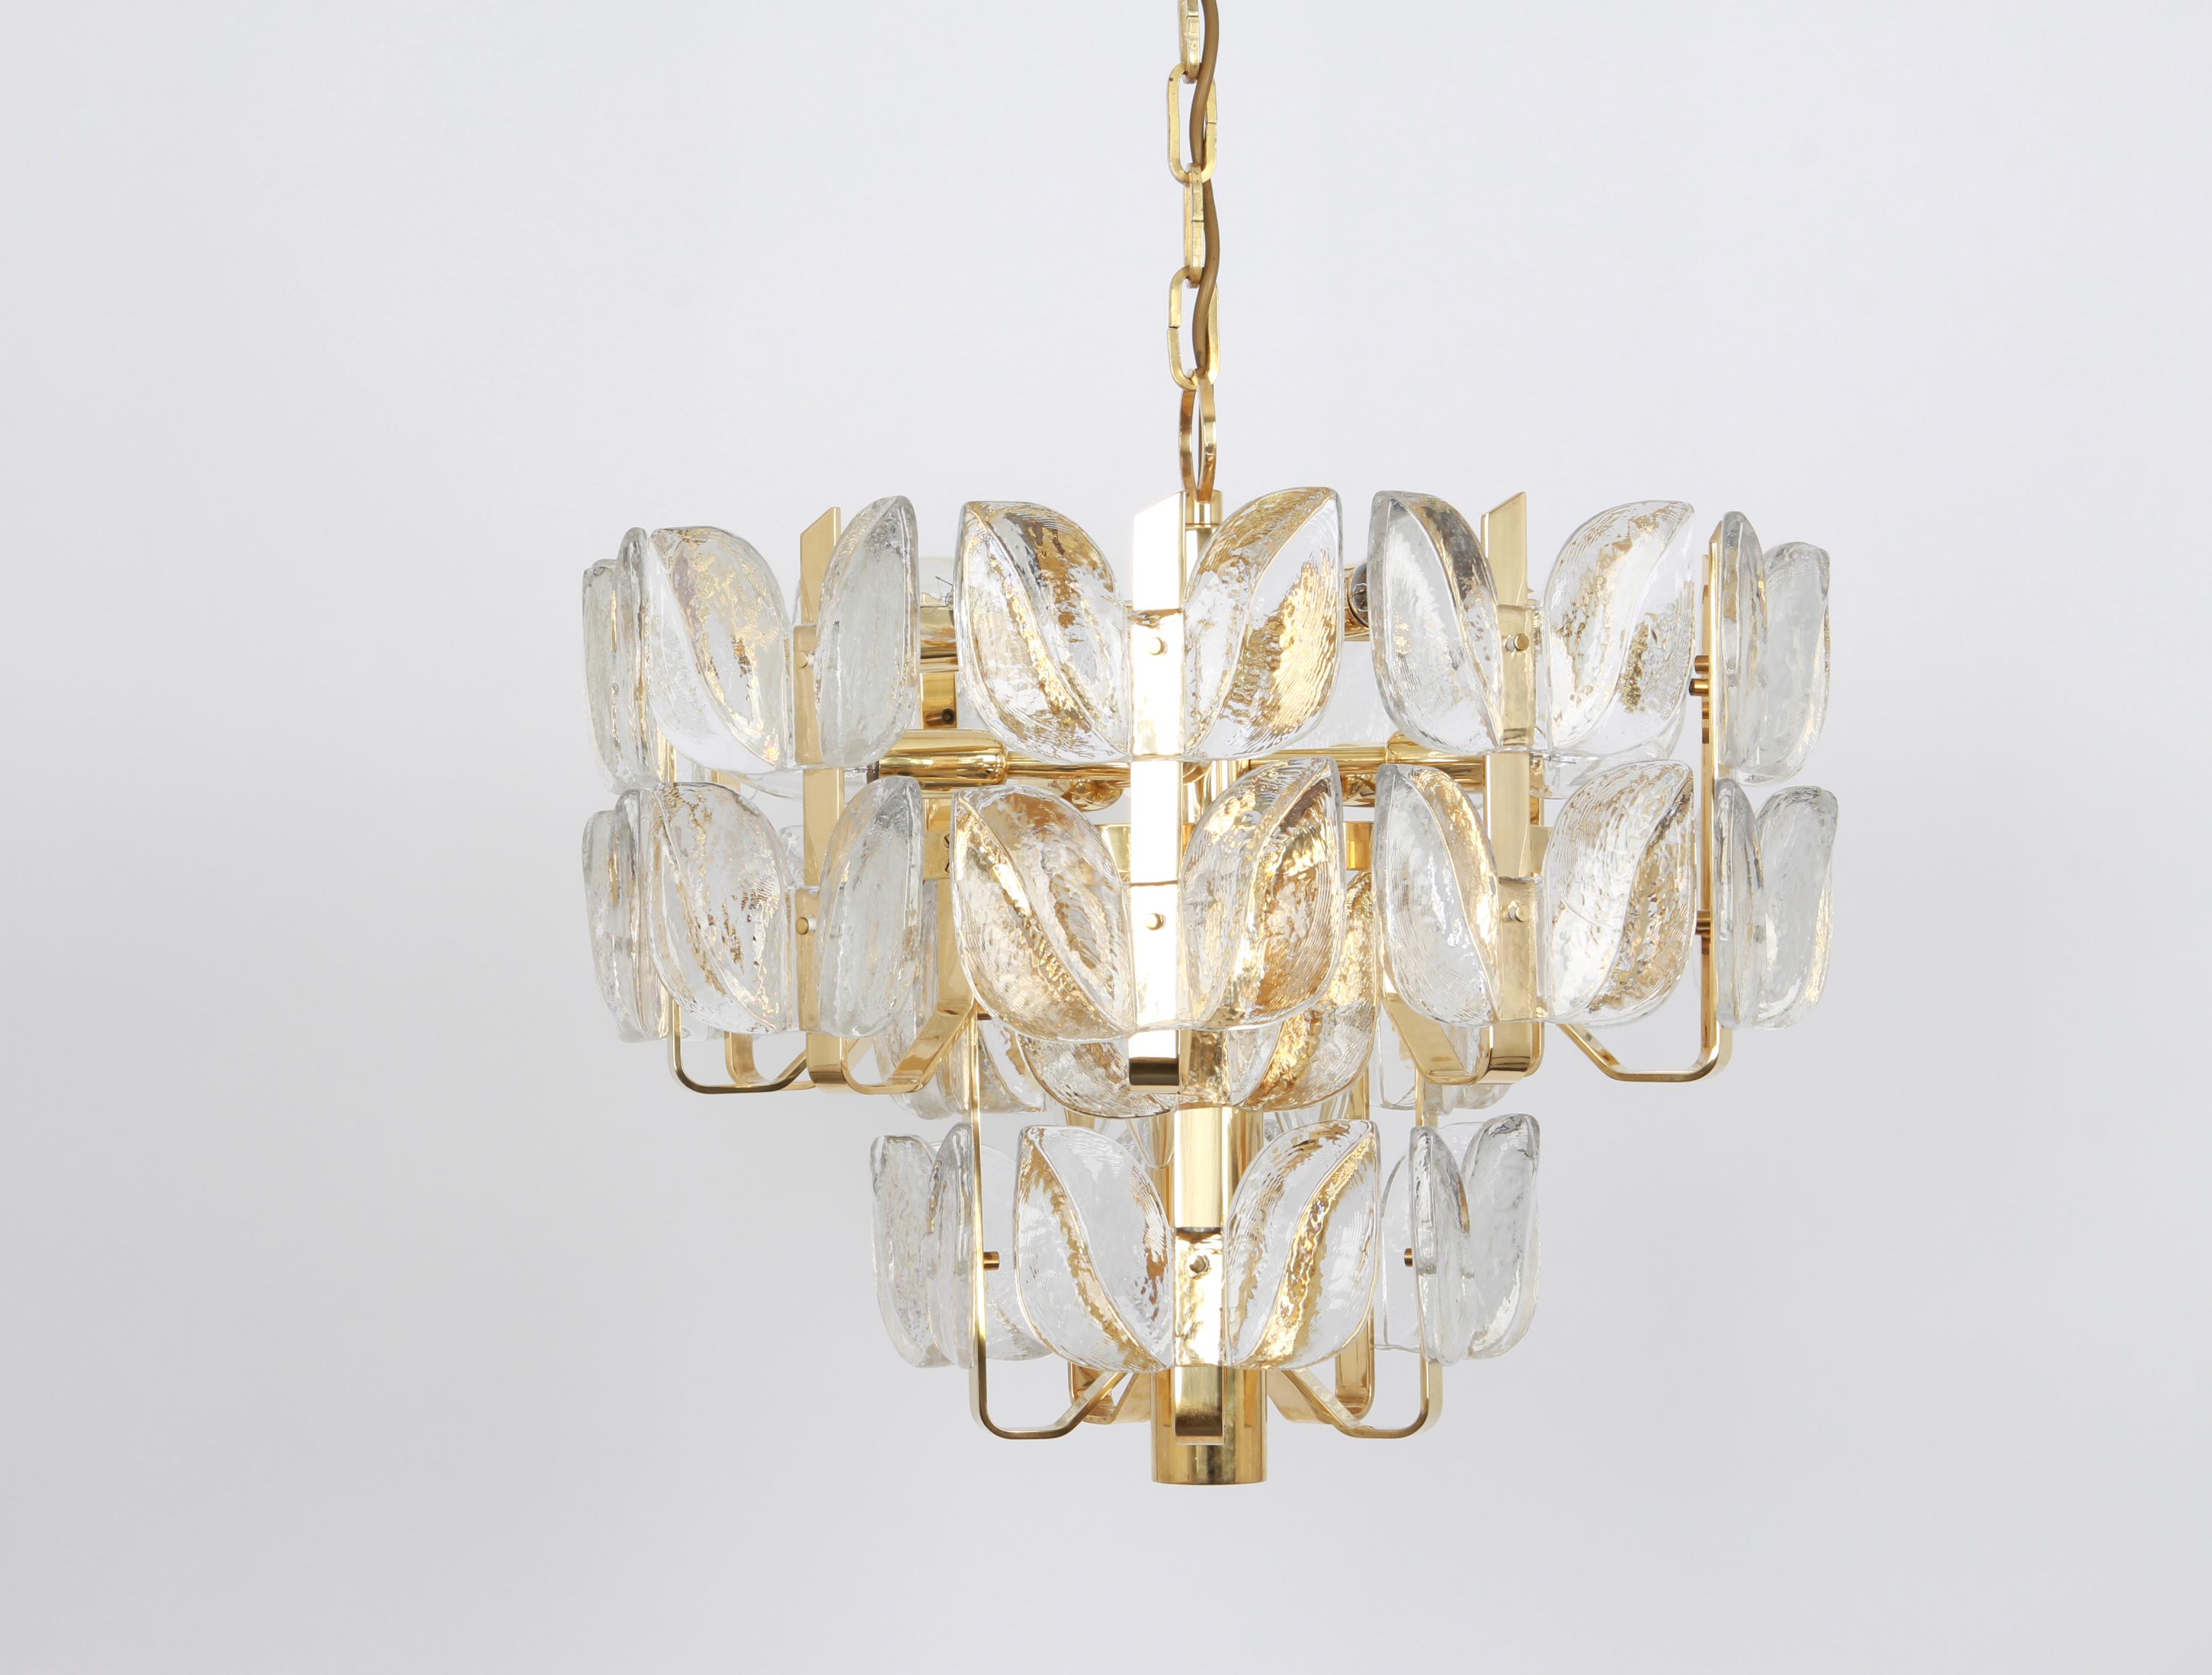 Wonderful gilt brass chandelier made by Kalmar (Serie: Florida), Austria, manufactured, circa 1970-1979.
Great structure gathering many structured glasses in leaves form, beautifully refracting the light very high quality.

High quality and in